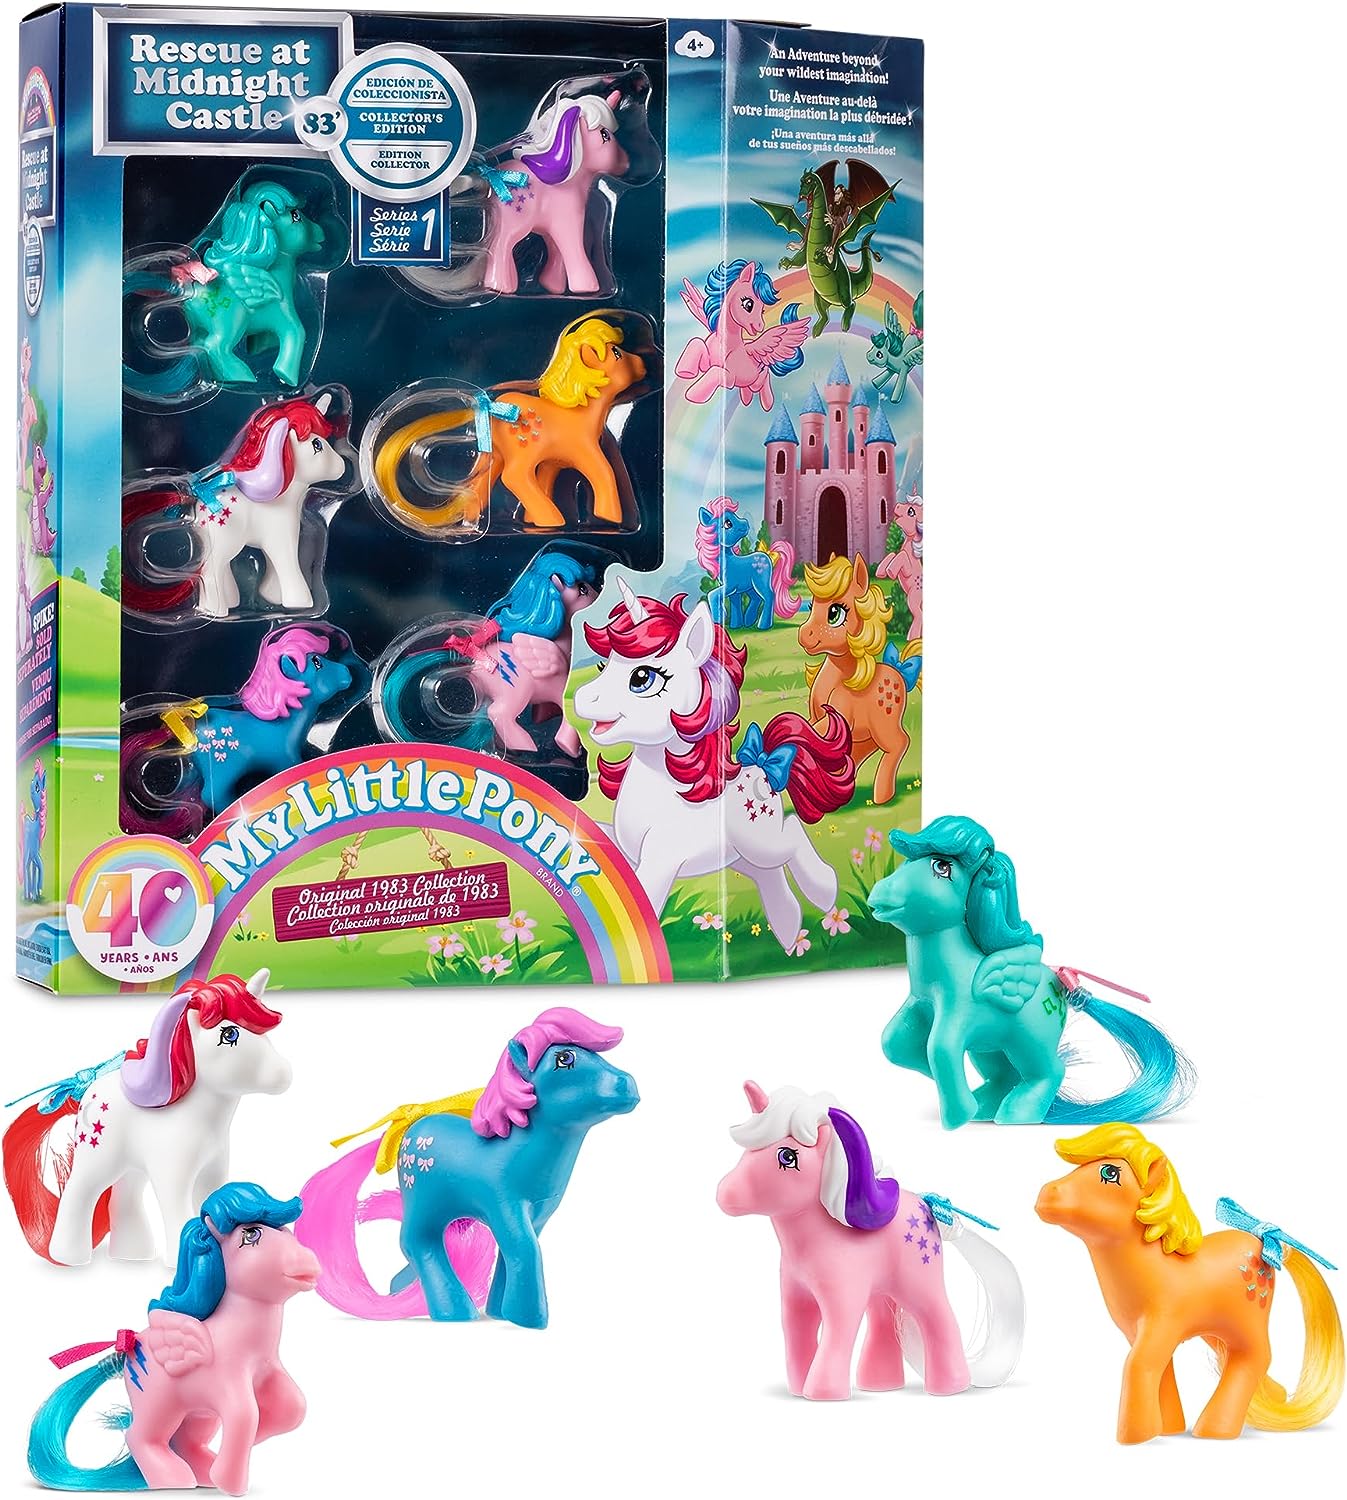 MLP 40th Anniversary Rescue at Midnight Castle Figure Collector Pack 1